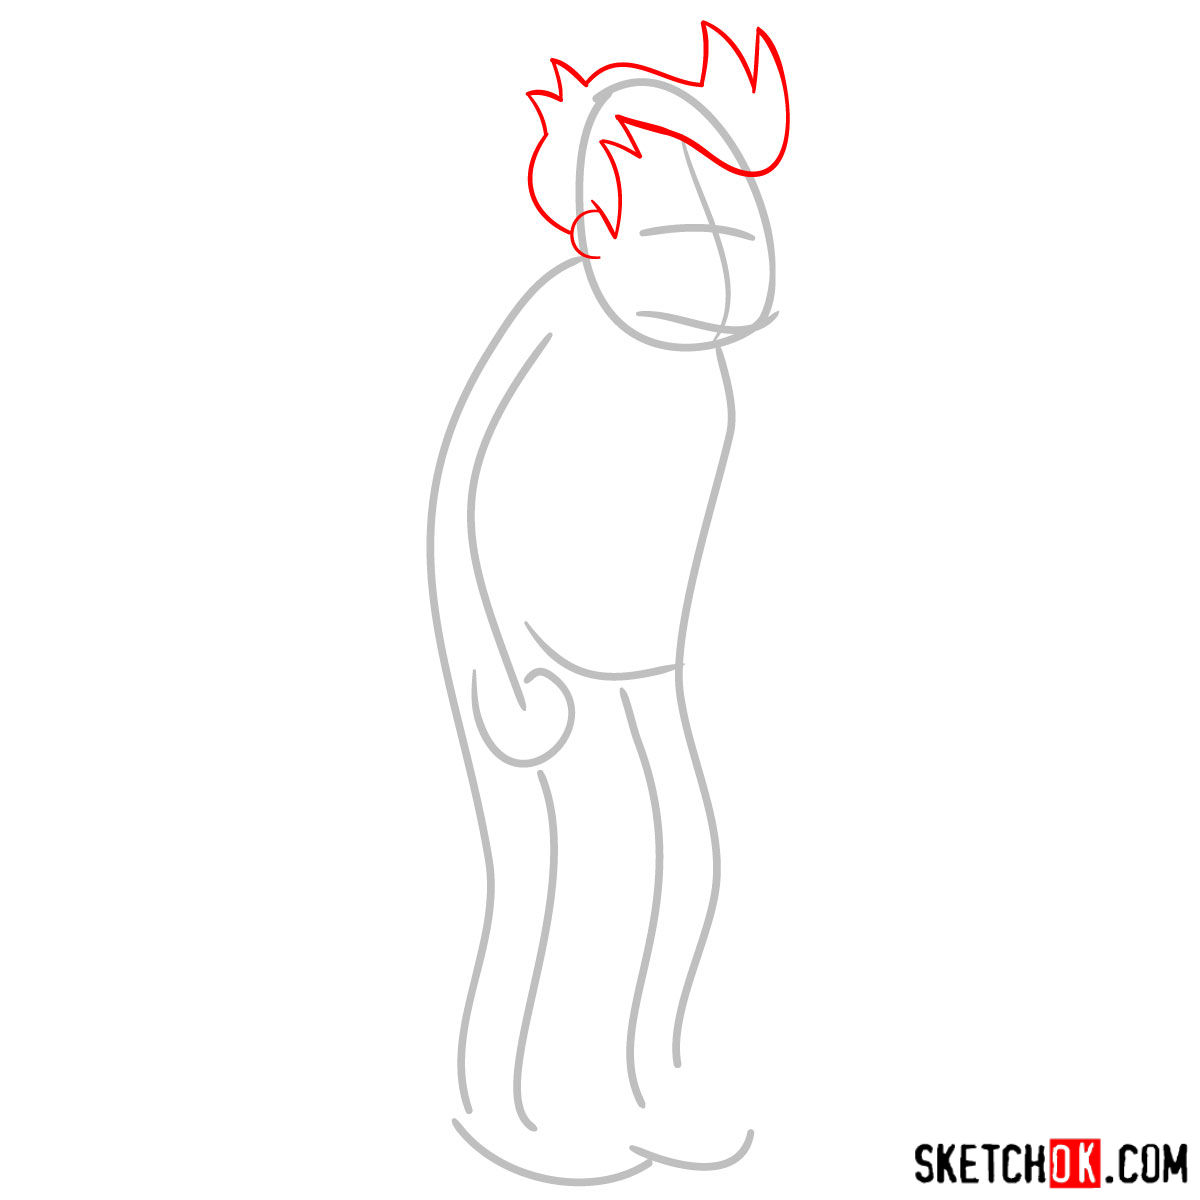 How to draw Philip J. Fry step by step - step 02